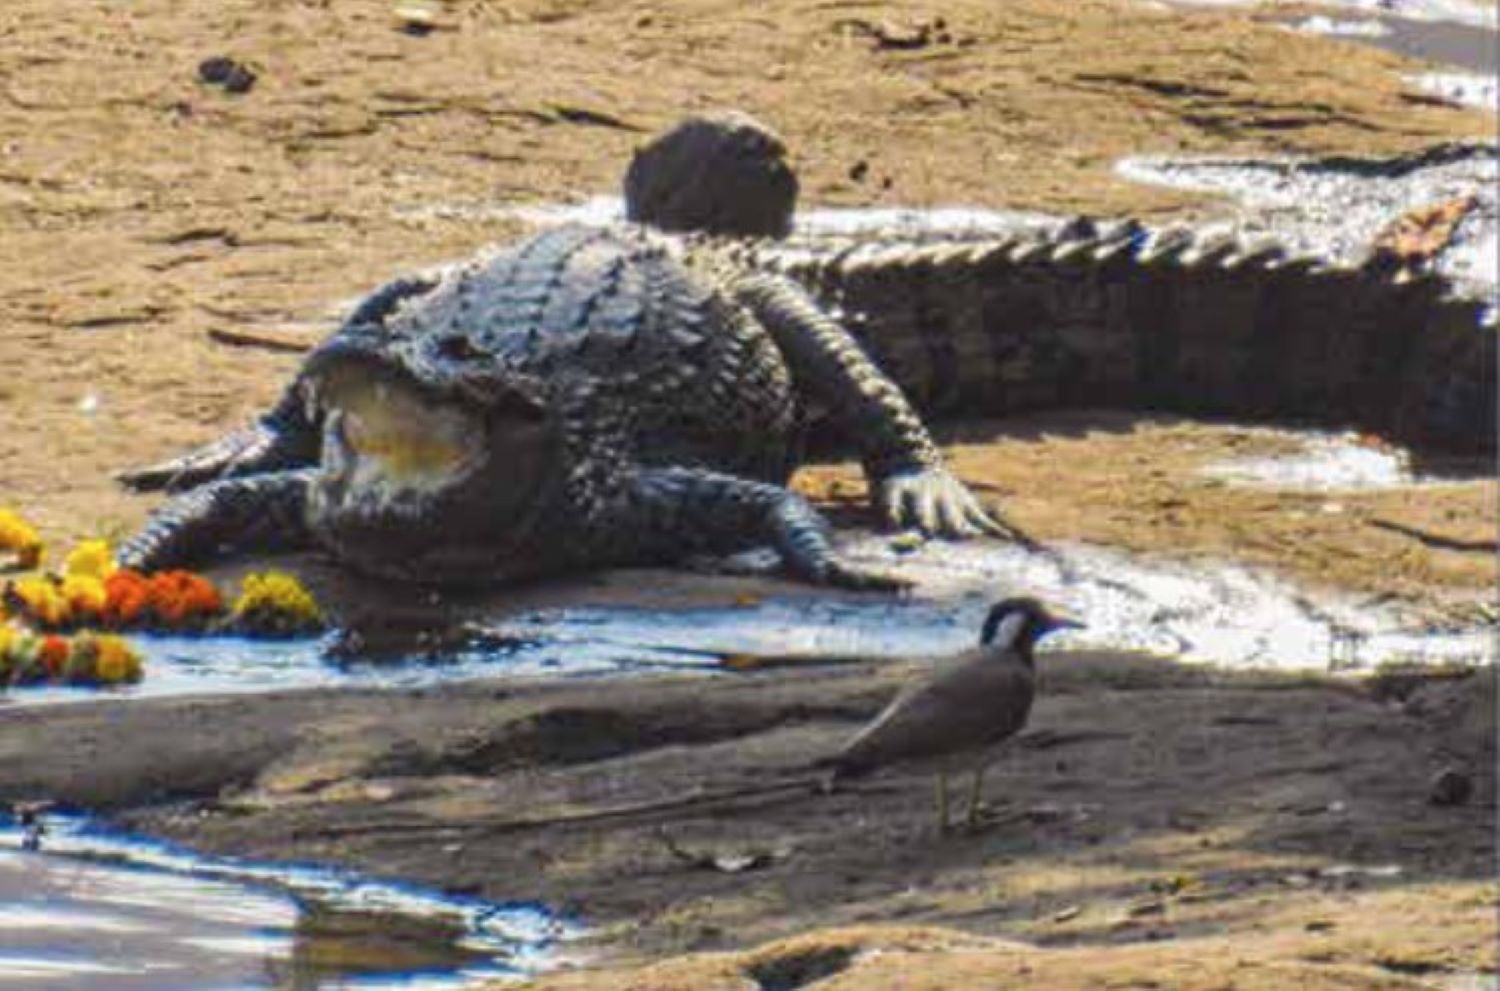 a mugger crocodile on the bank of a river next to a garland of marigolds